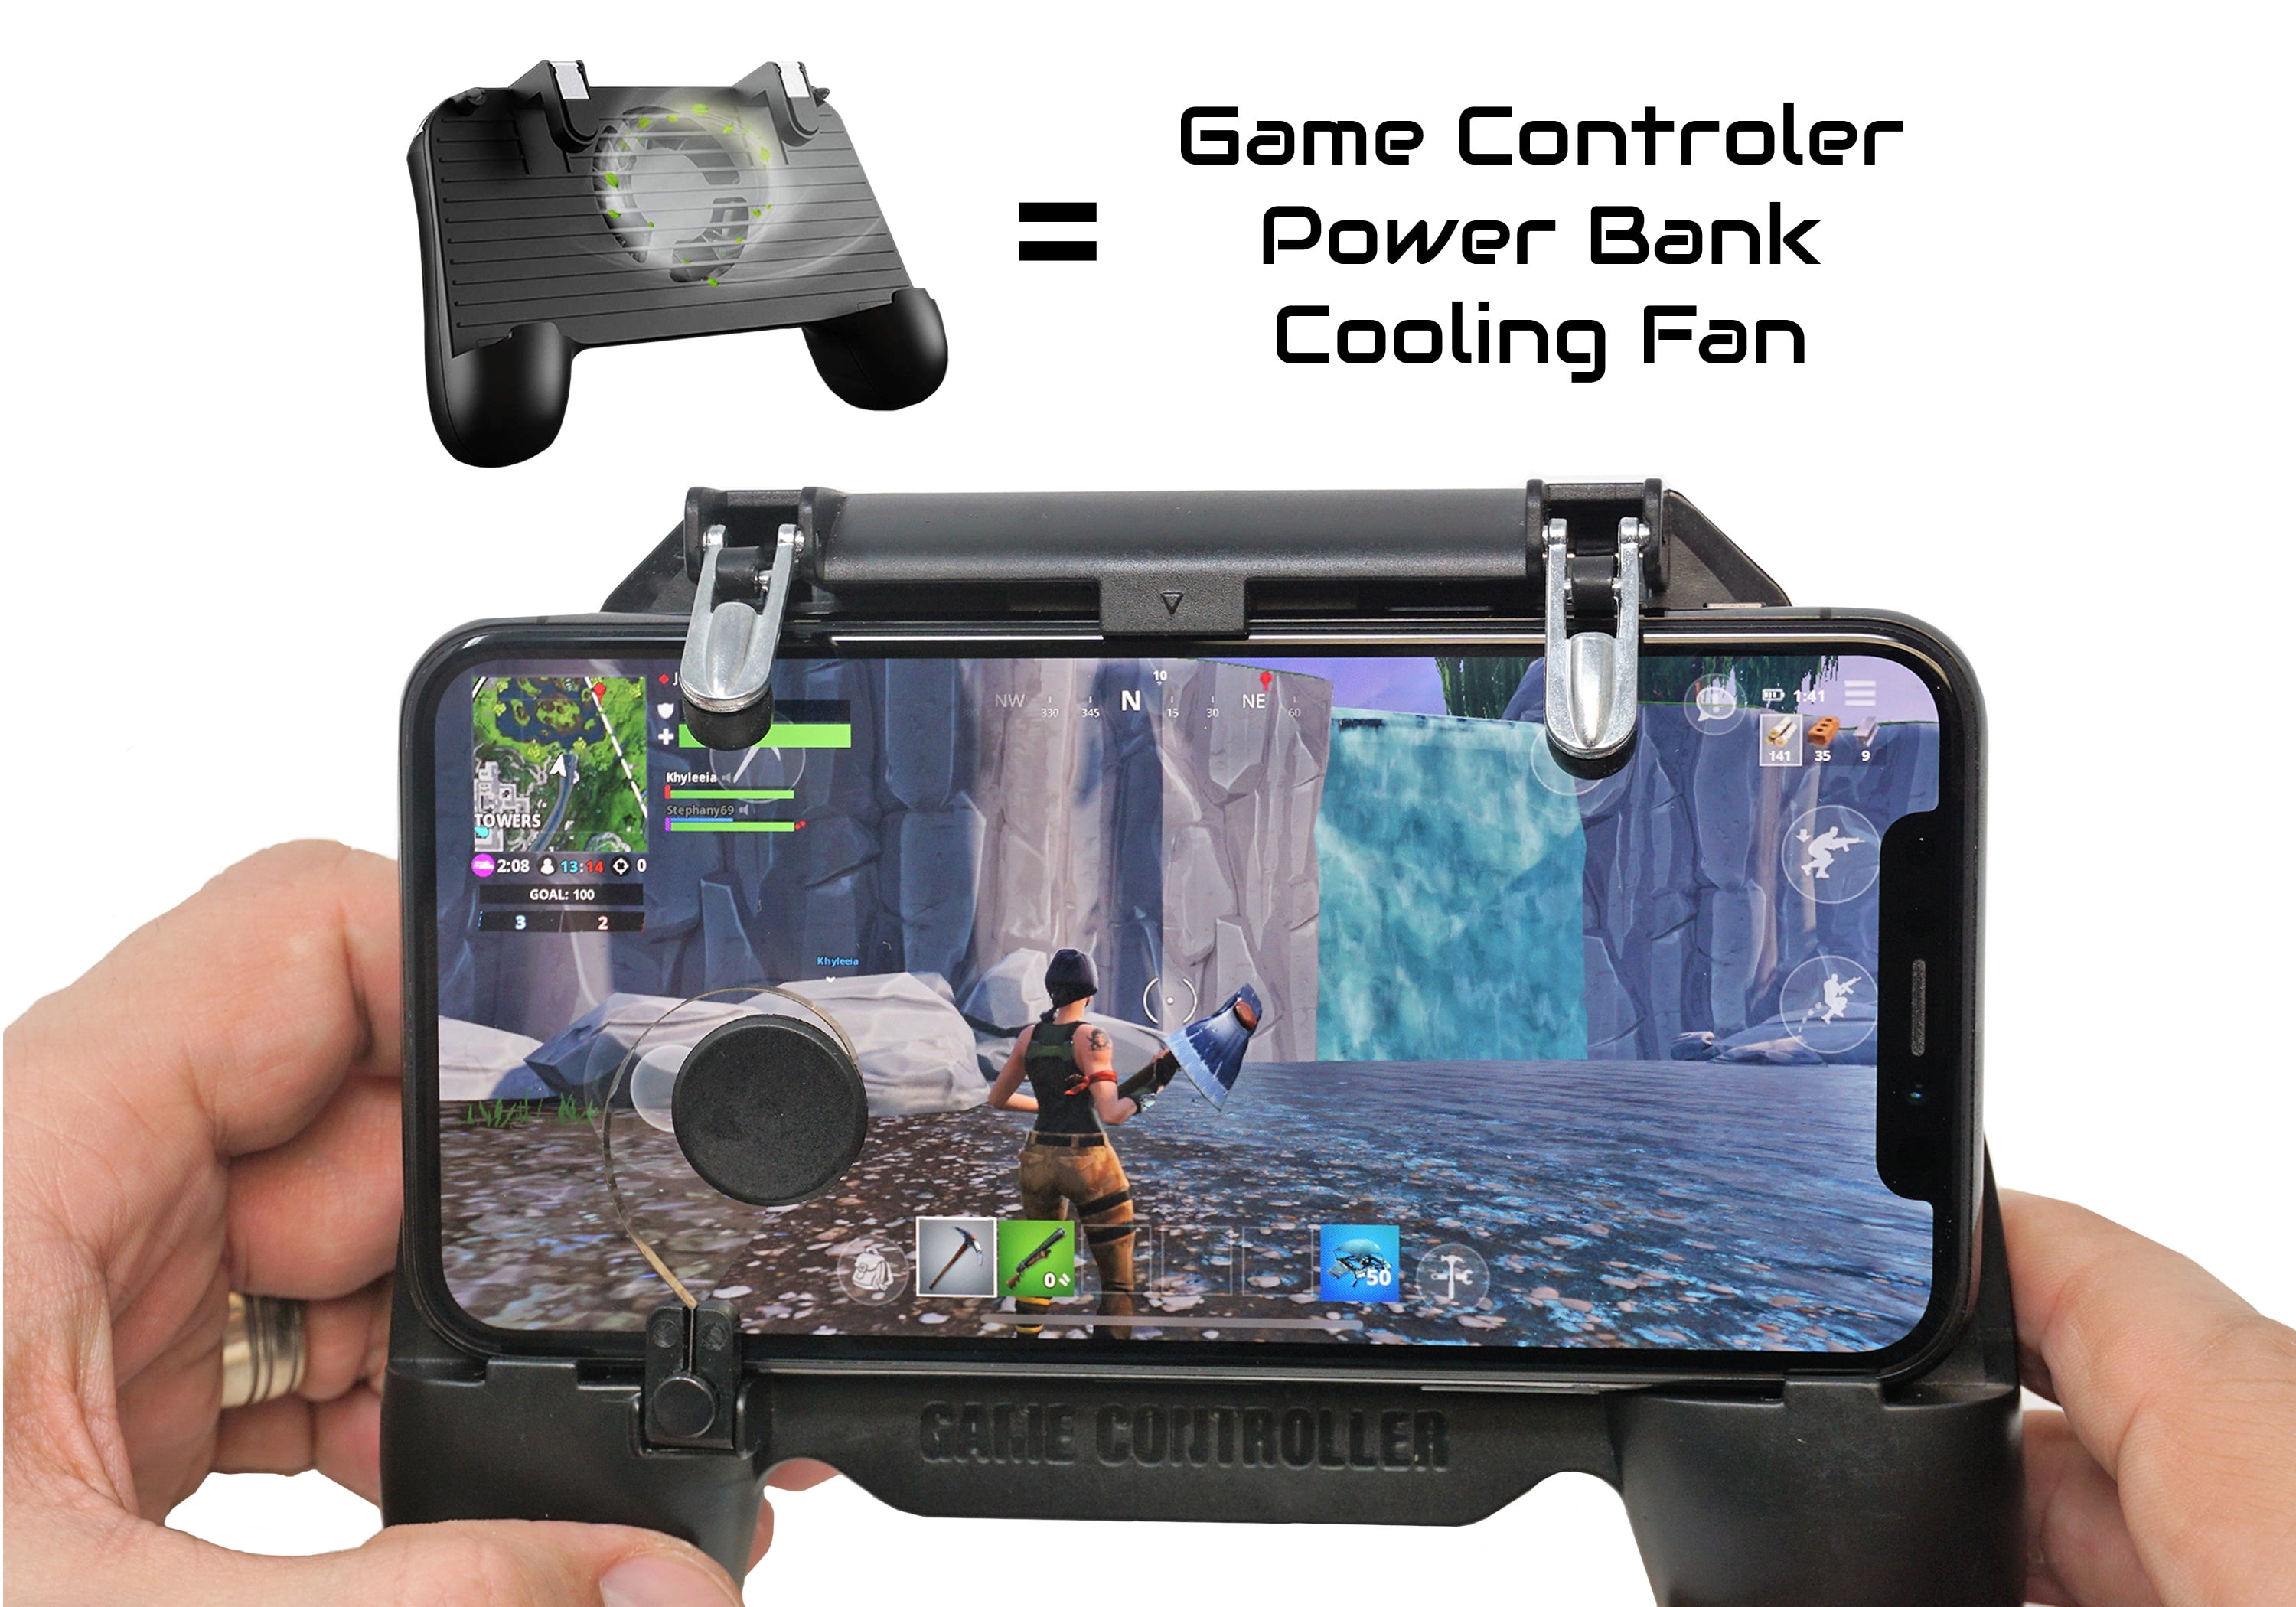 Rijp Selectiekader Verwoesten Agoz Phone Gamepad Controller Mobile Gaming Grip PUBG Shoot Aim L1R1  Trigger Power Bank Battery Charger Cooling Fan for Apple iPhone XS MAX, XS,  XR, X, 8 Plus, 8, 7 Plus, 7,